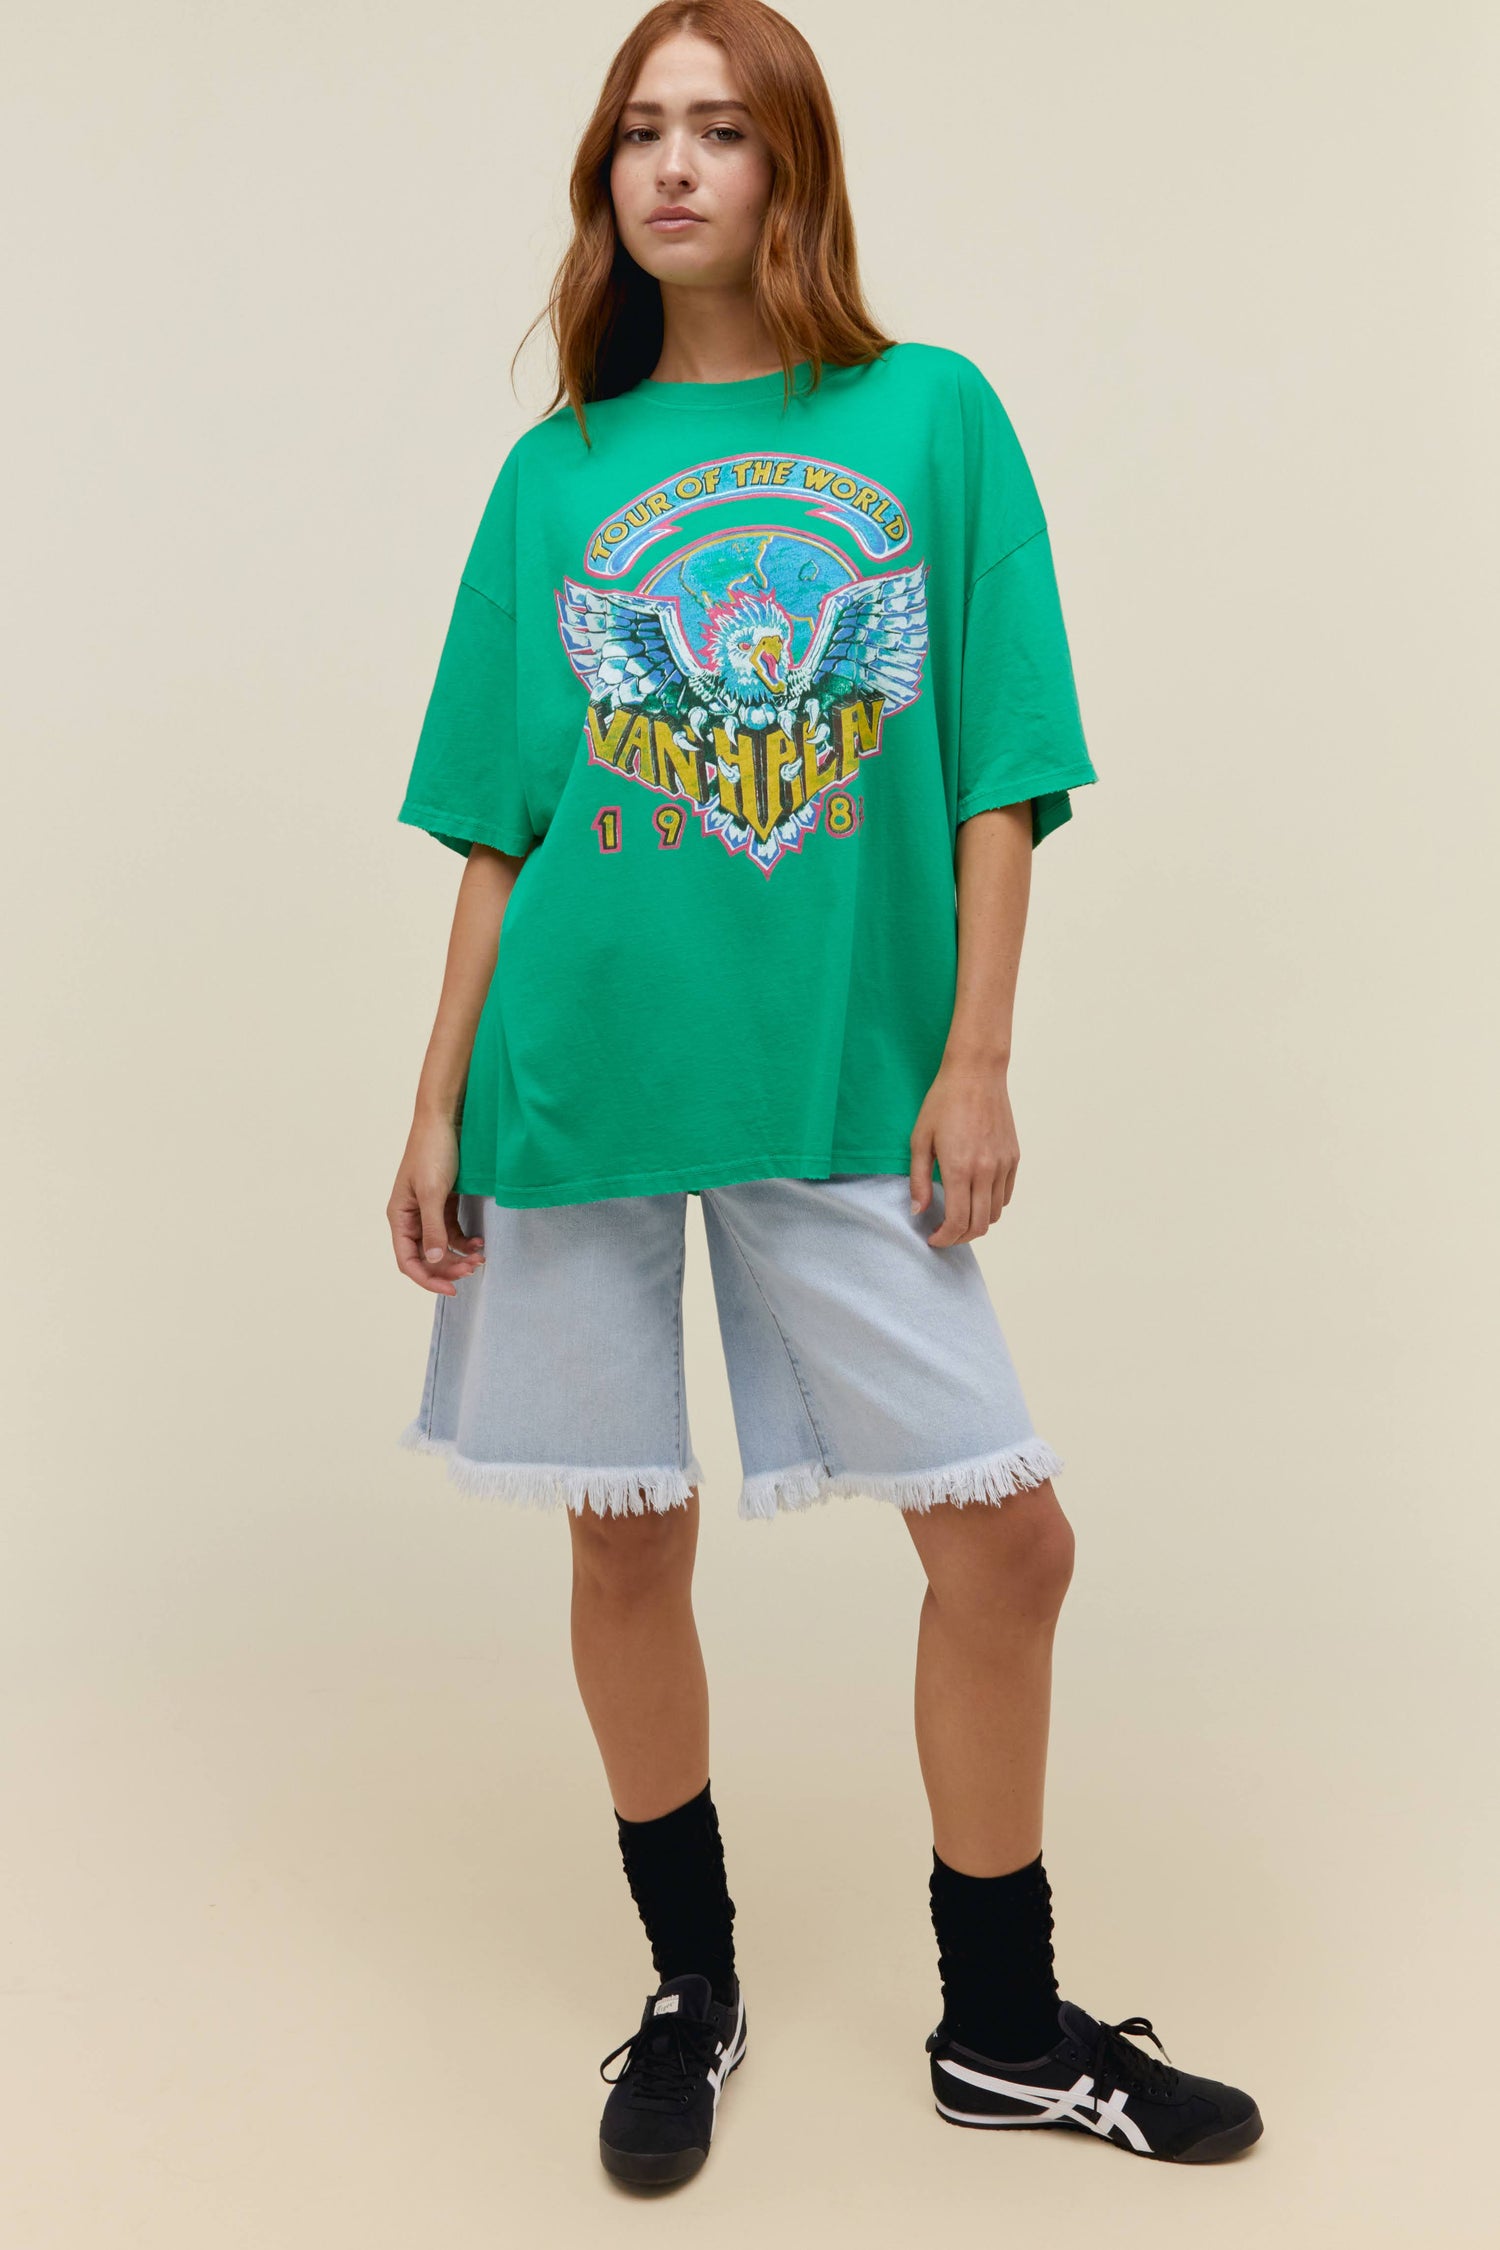  A model featuring a mint green tee with "Tour of the World" across the chest area and a graphic of the Van Halen tour below 